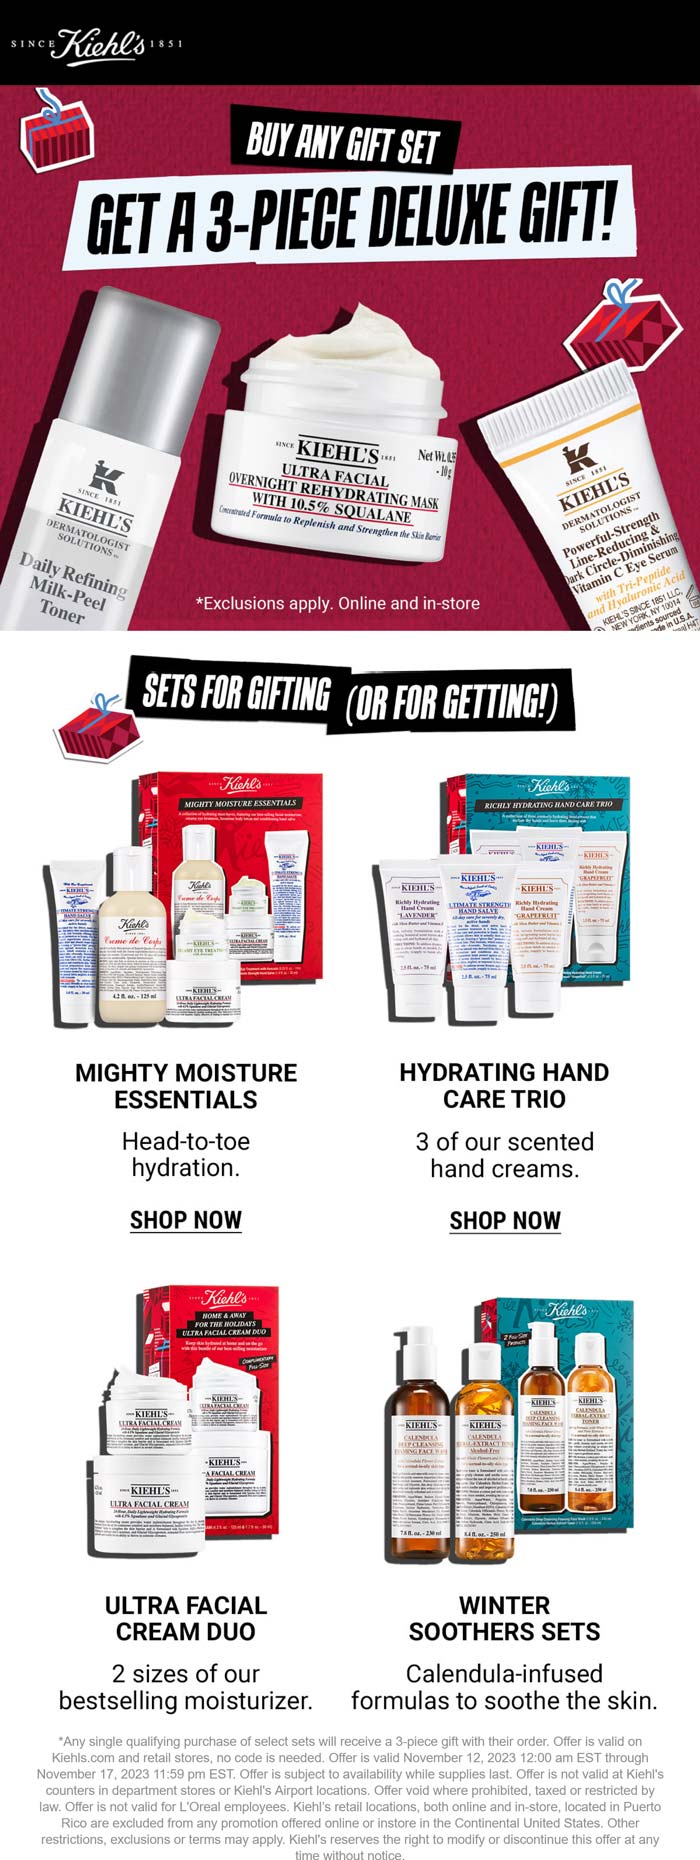 Free 3pc kit with any gift set purchase online at Kiehls #kiehls